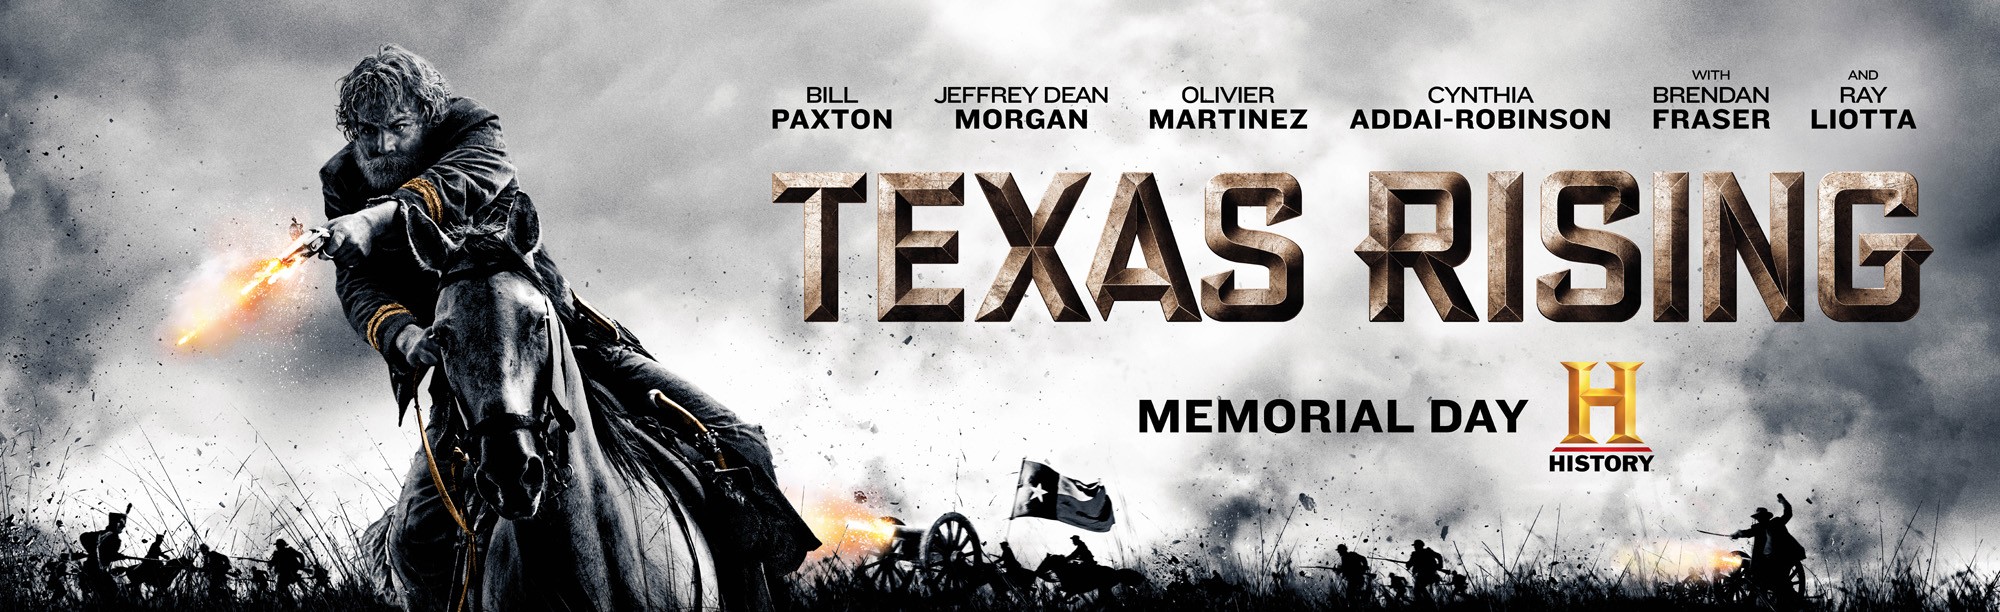 Mega Sized TV Poster Image for Texas Rising (#11 of 17)